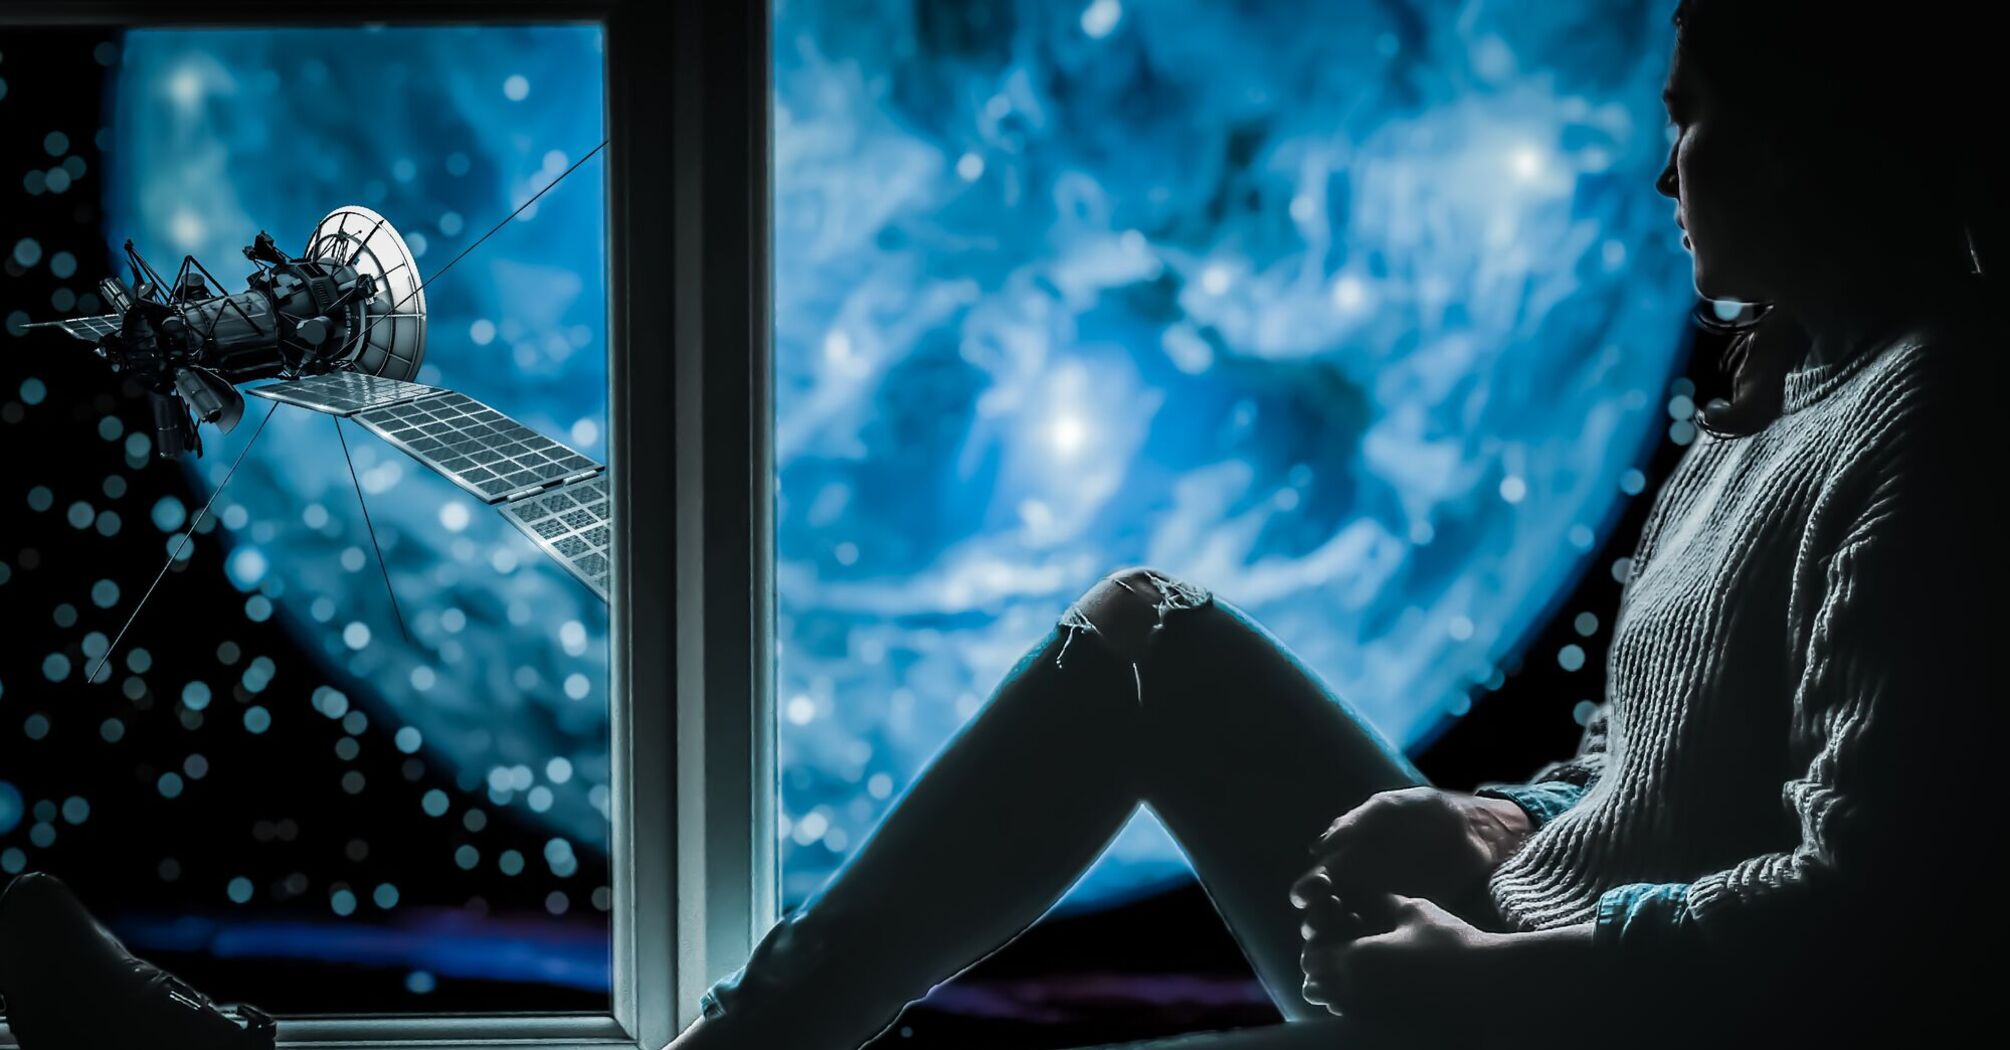 Silhouette of a person sitting by a window with a view of a satellite in orbit against a backdrop of Earth